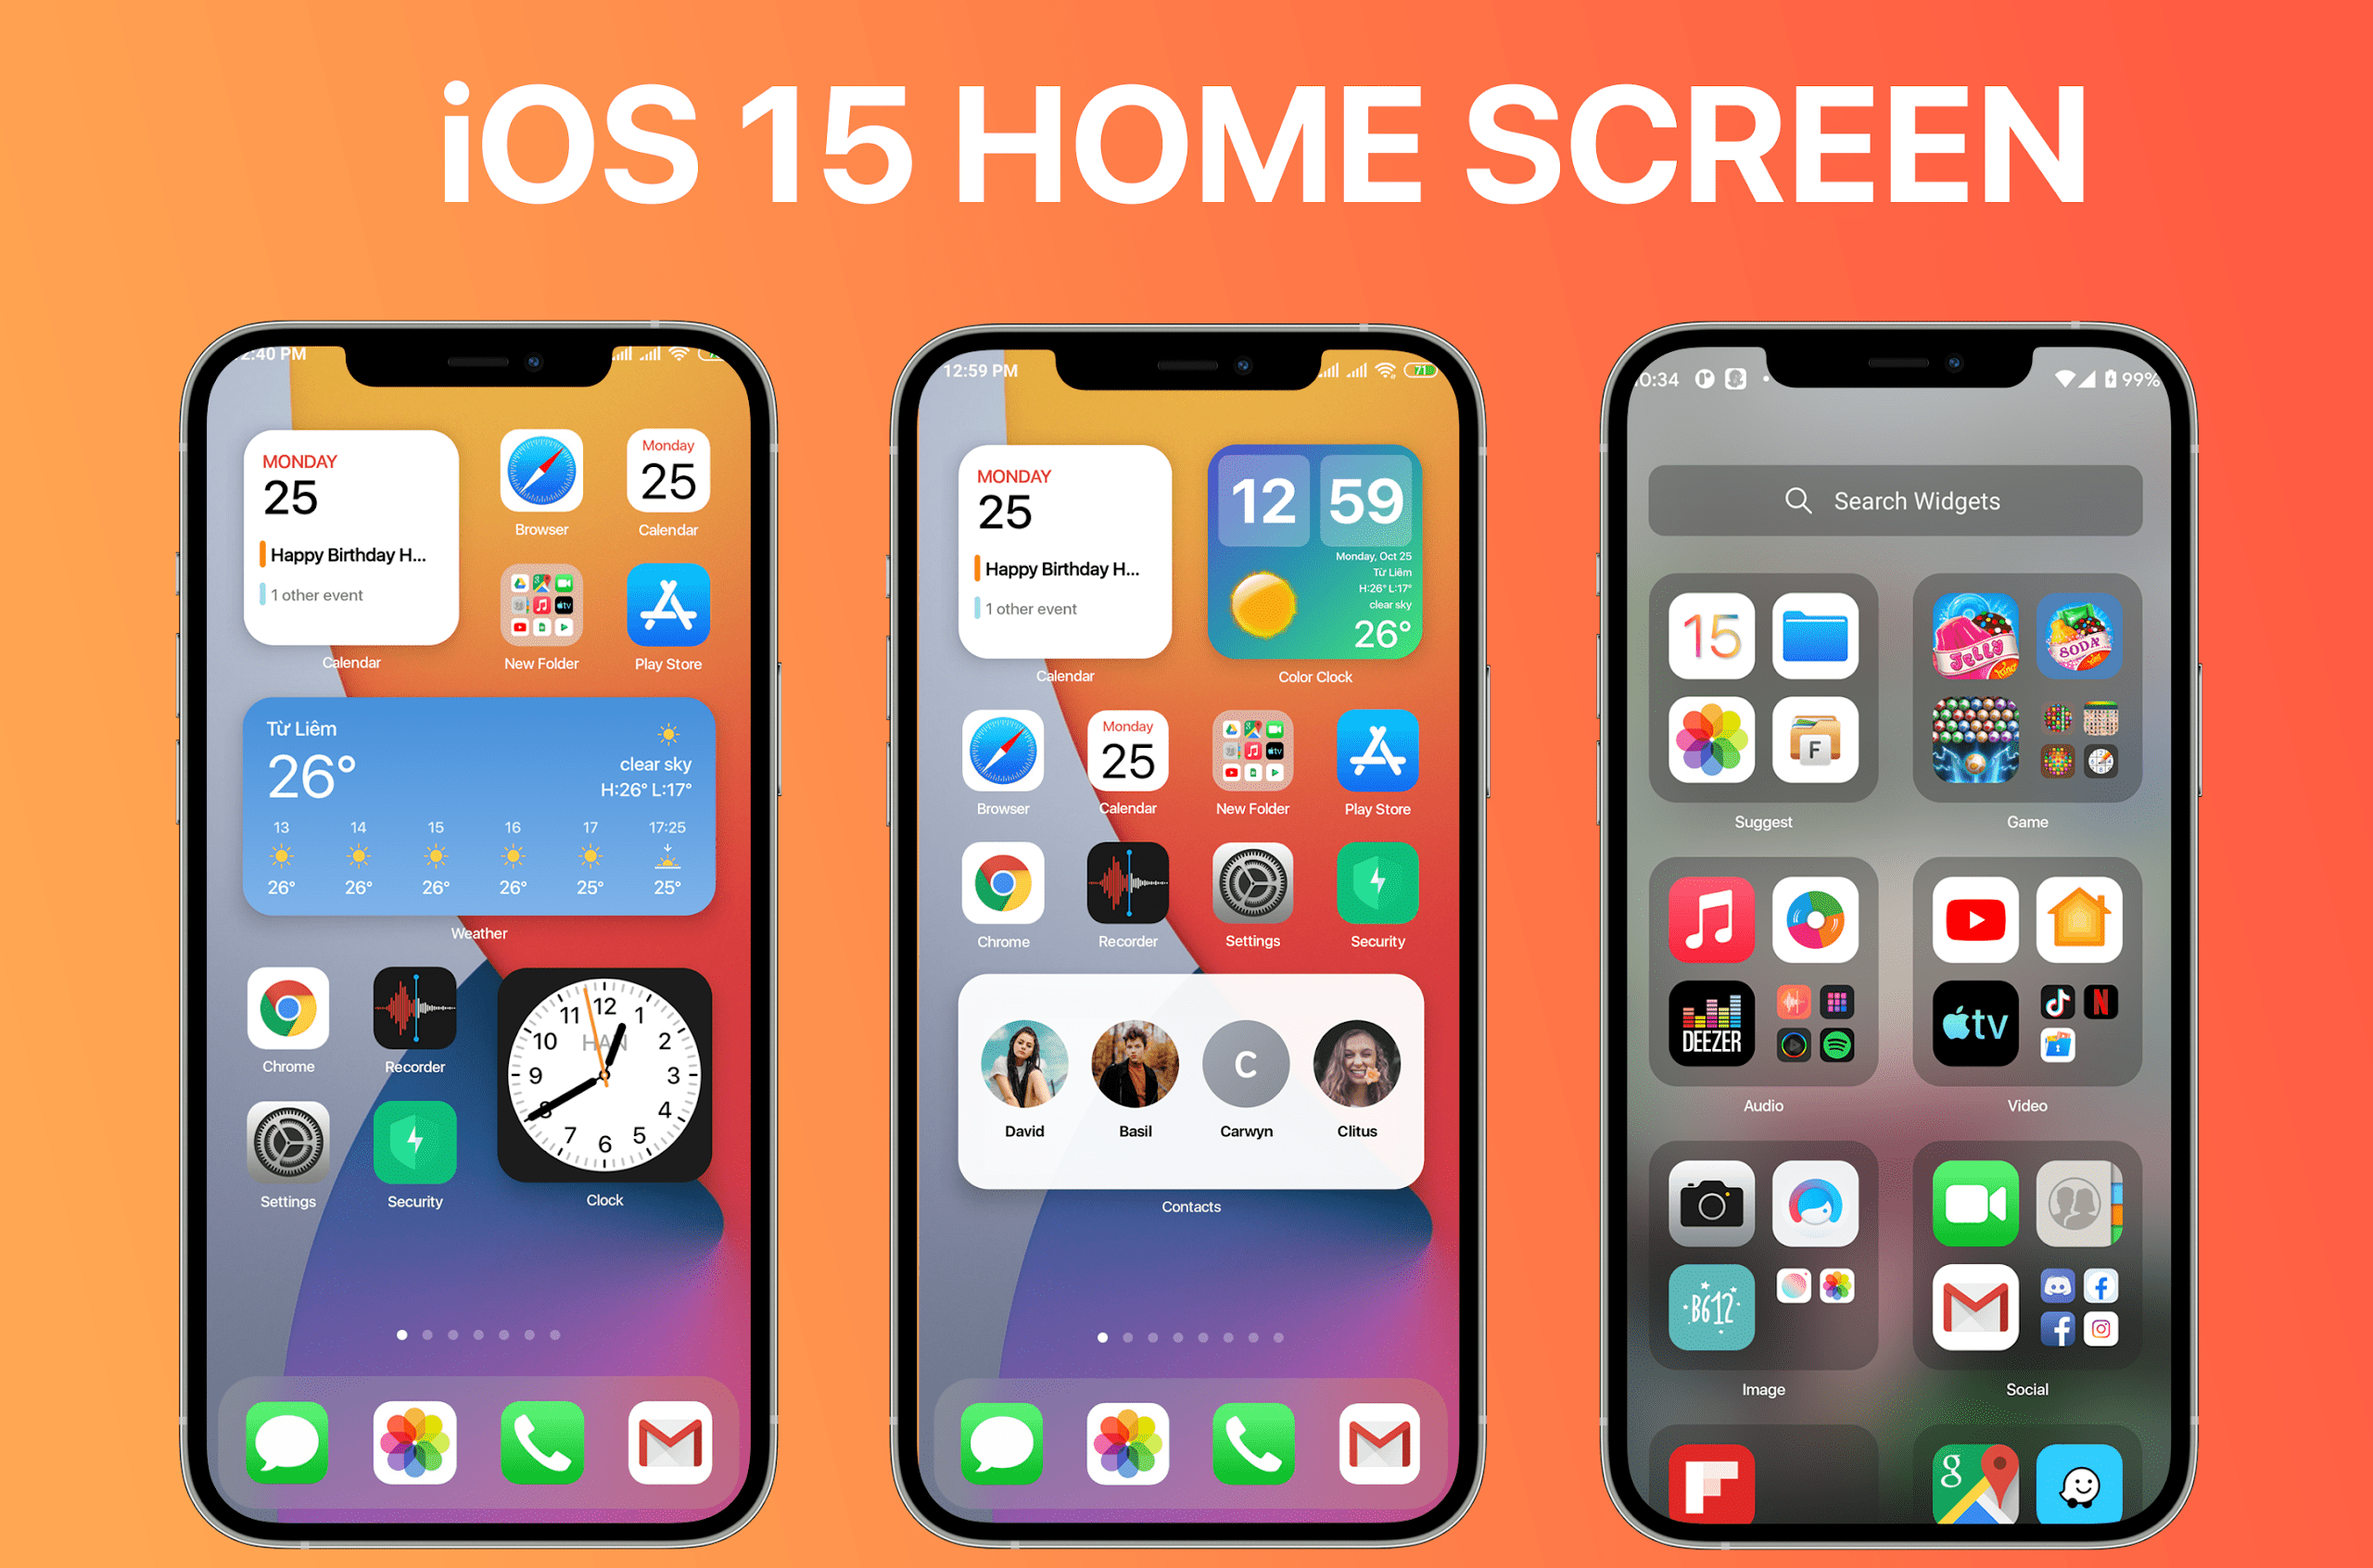 Launcher-iOS16-iLauncher-2.png